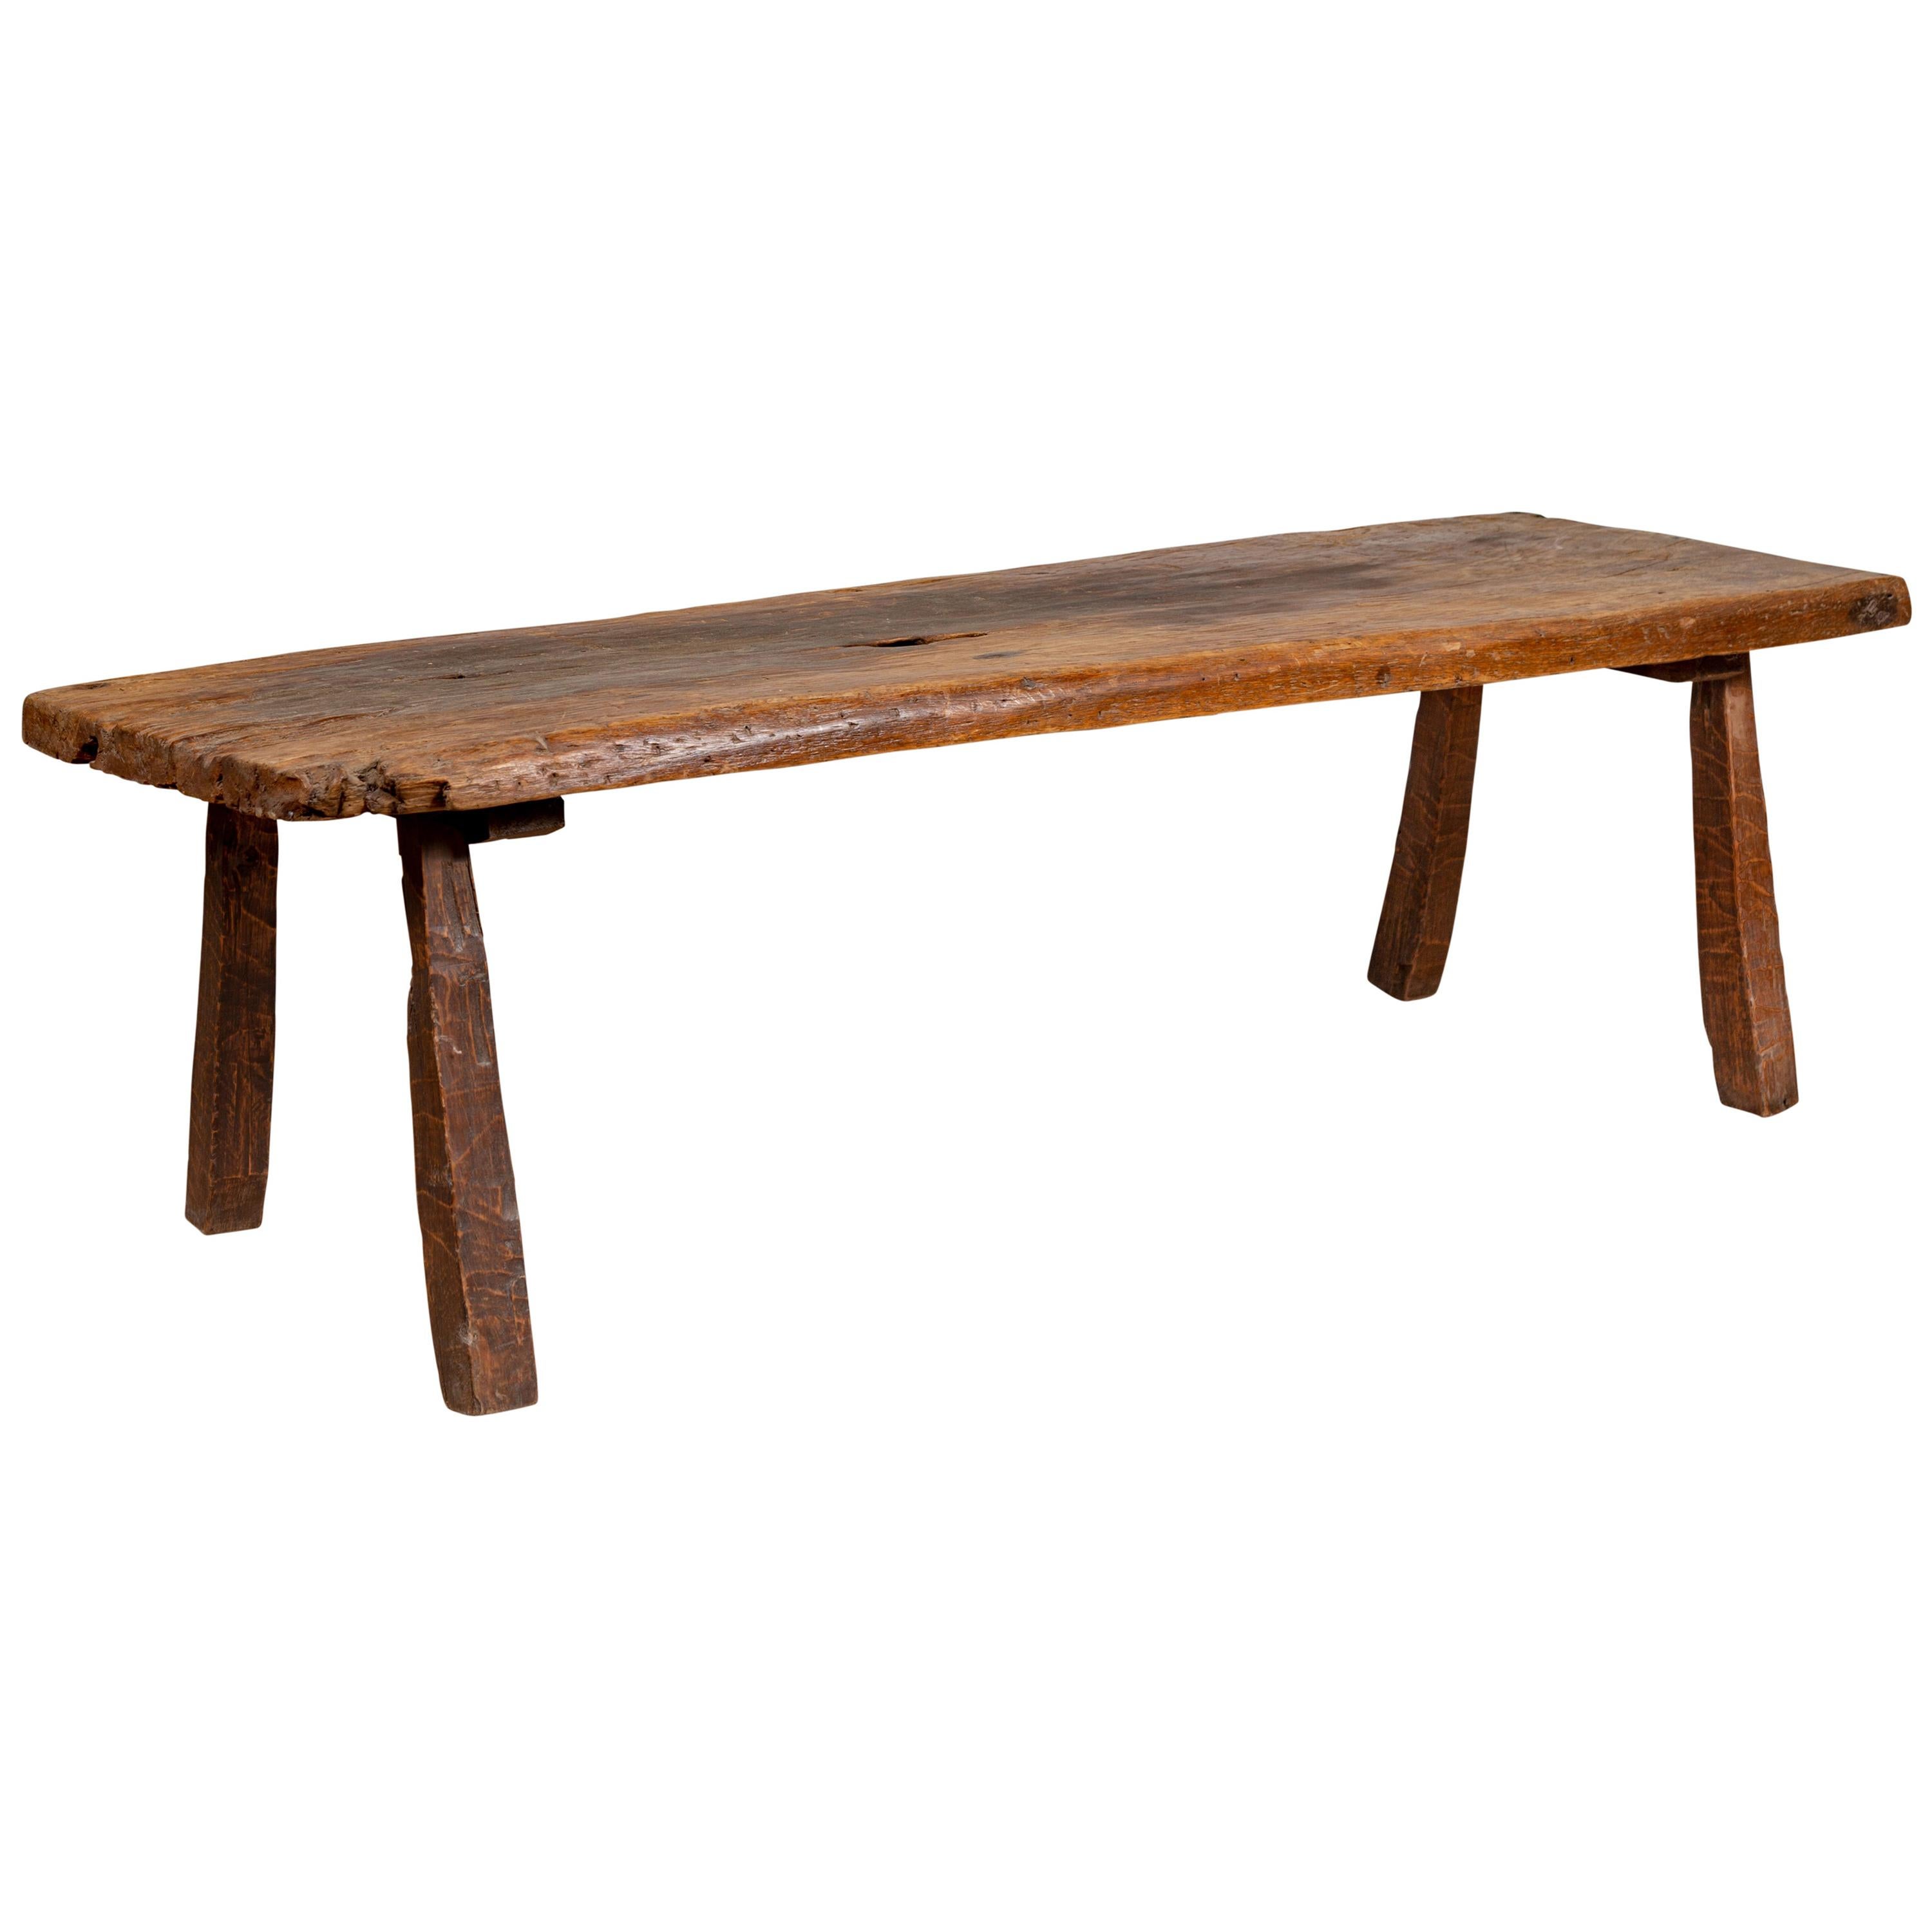 Rustic Indonesian Antique Wooden Bench with Weathered Appearance